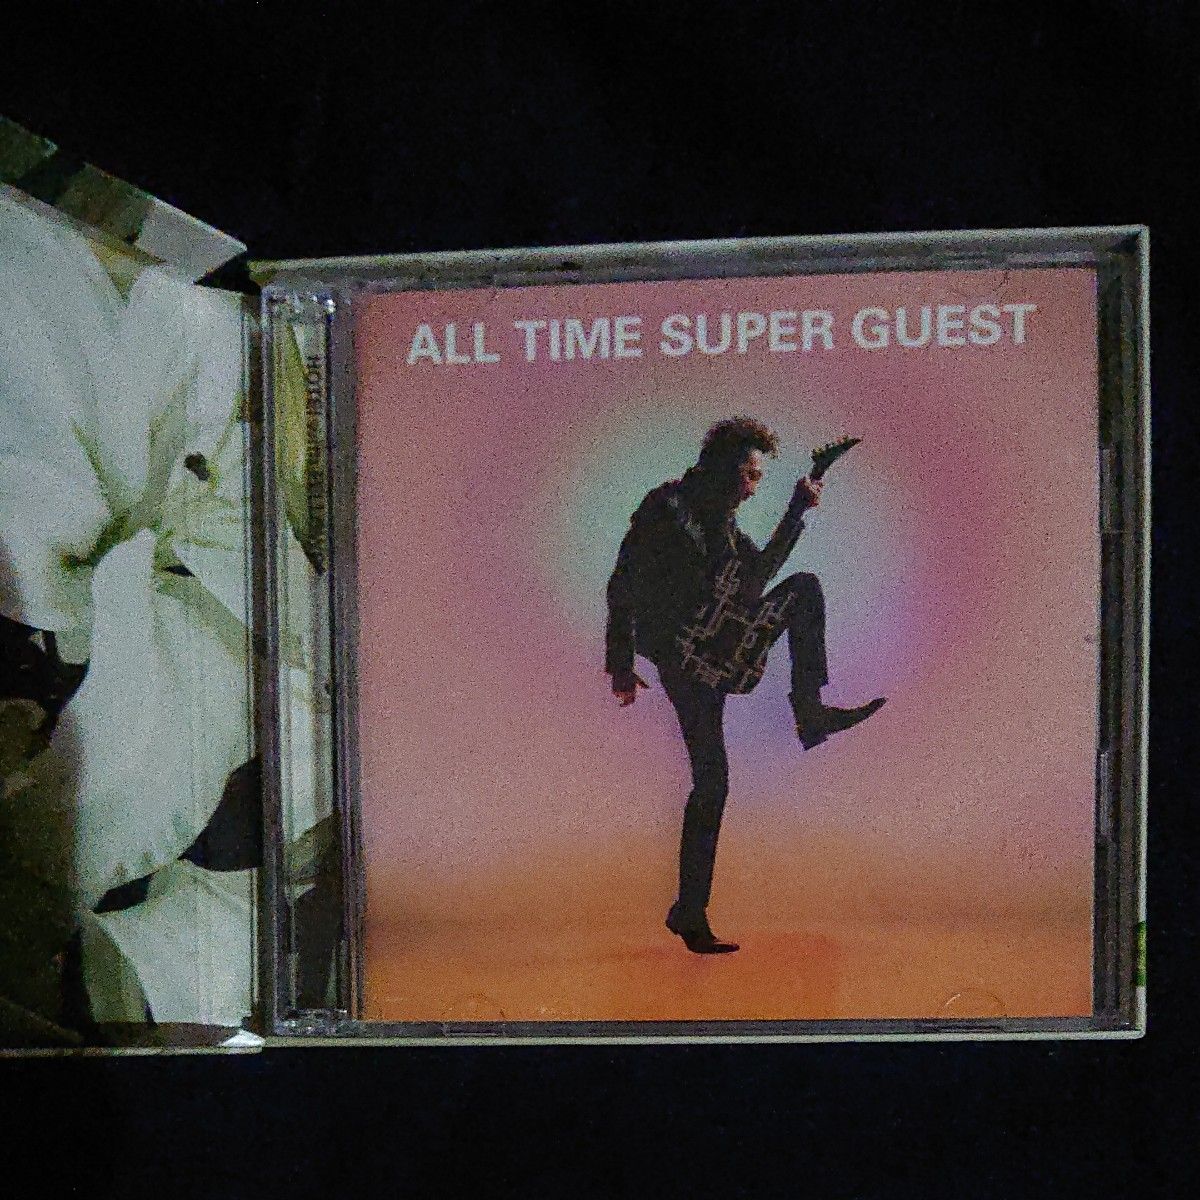 ALL TIME SUPER GUEST (初回限定盤) (DVD付) 布袋寅泰